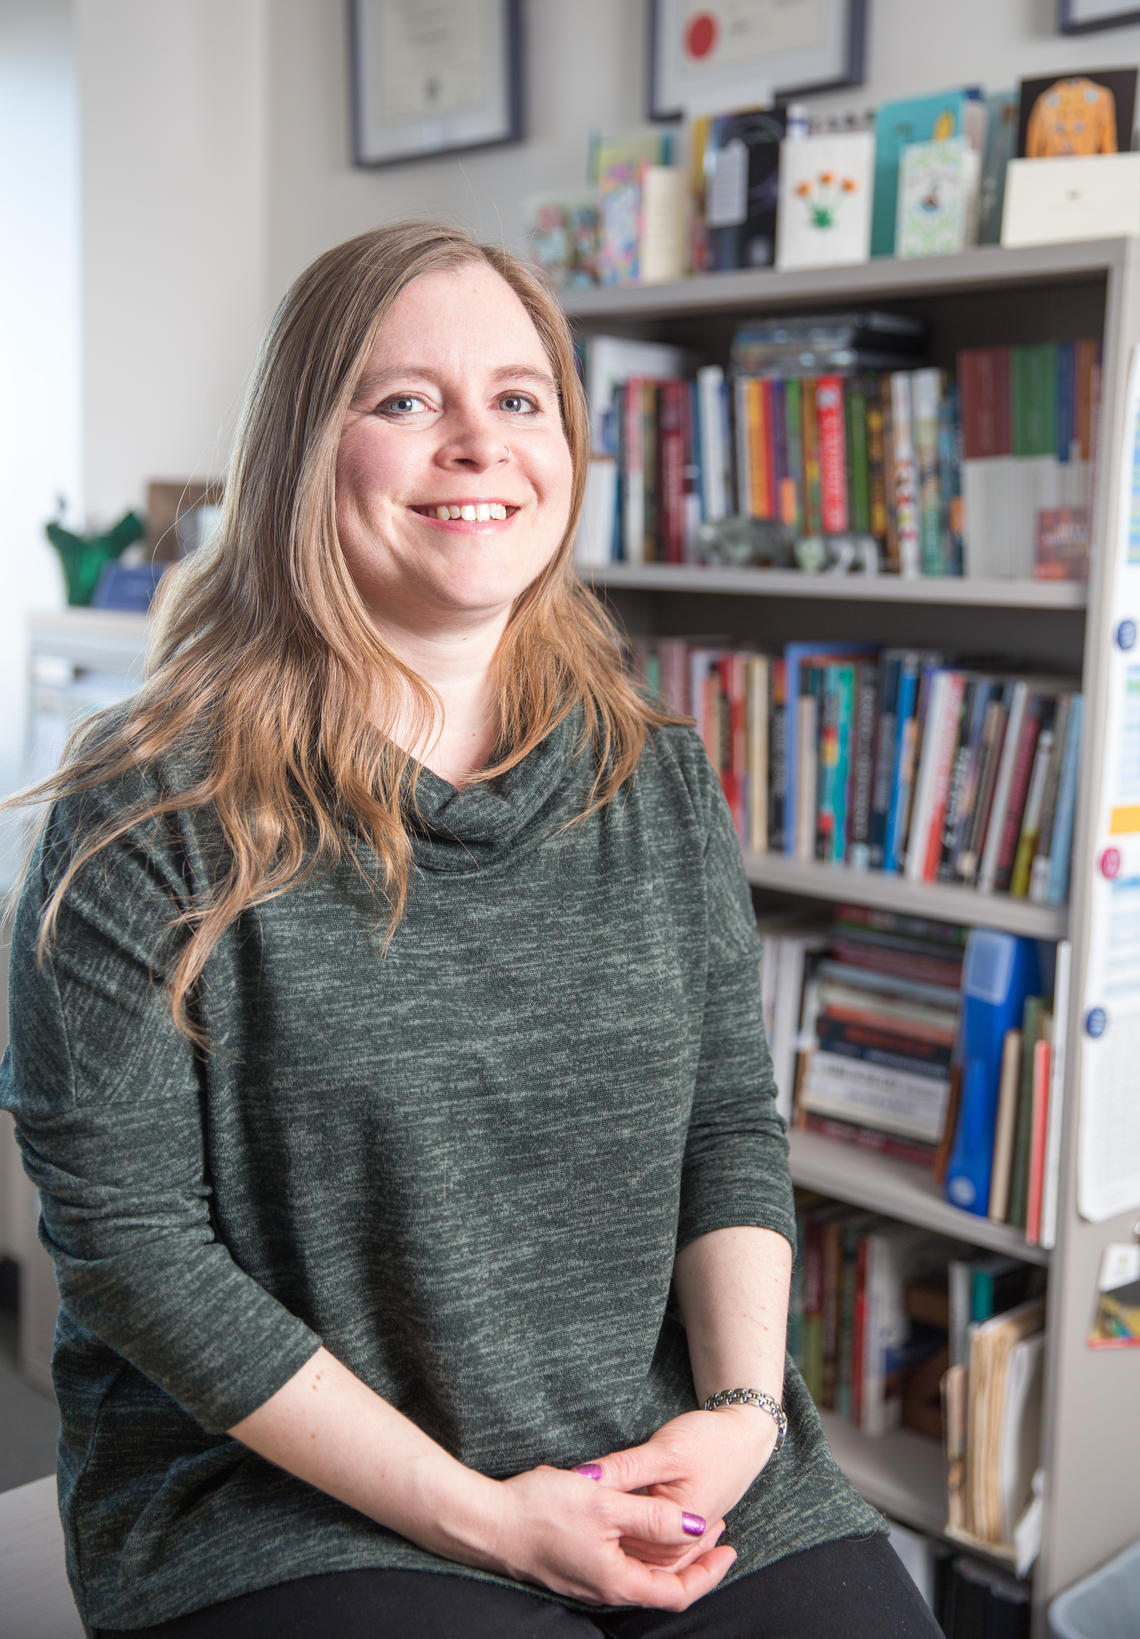 Aubrey Hanson, an assistant professor in the Werklund School of Education, received this year's Award for Teaching in Online Environments